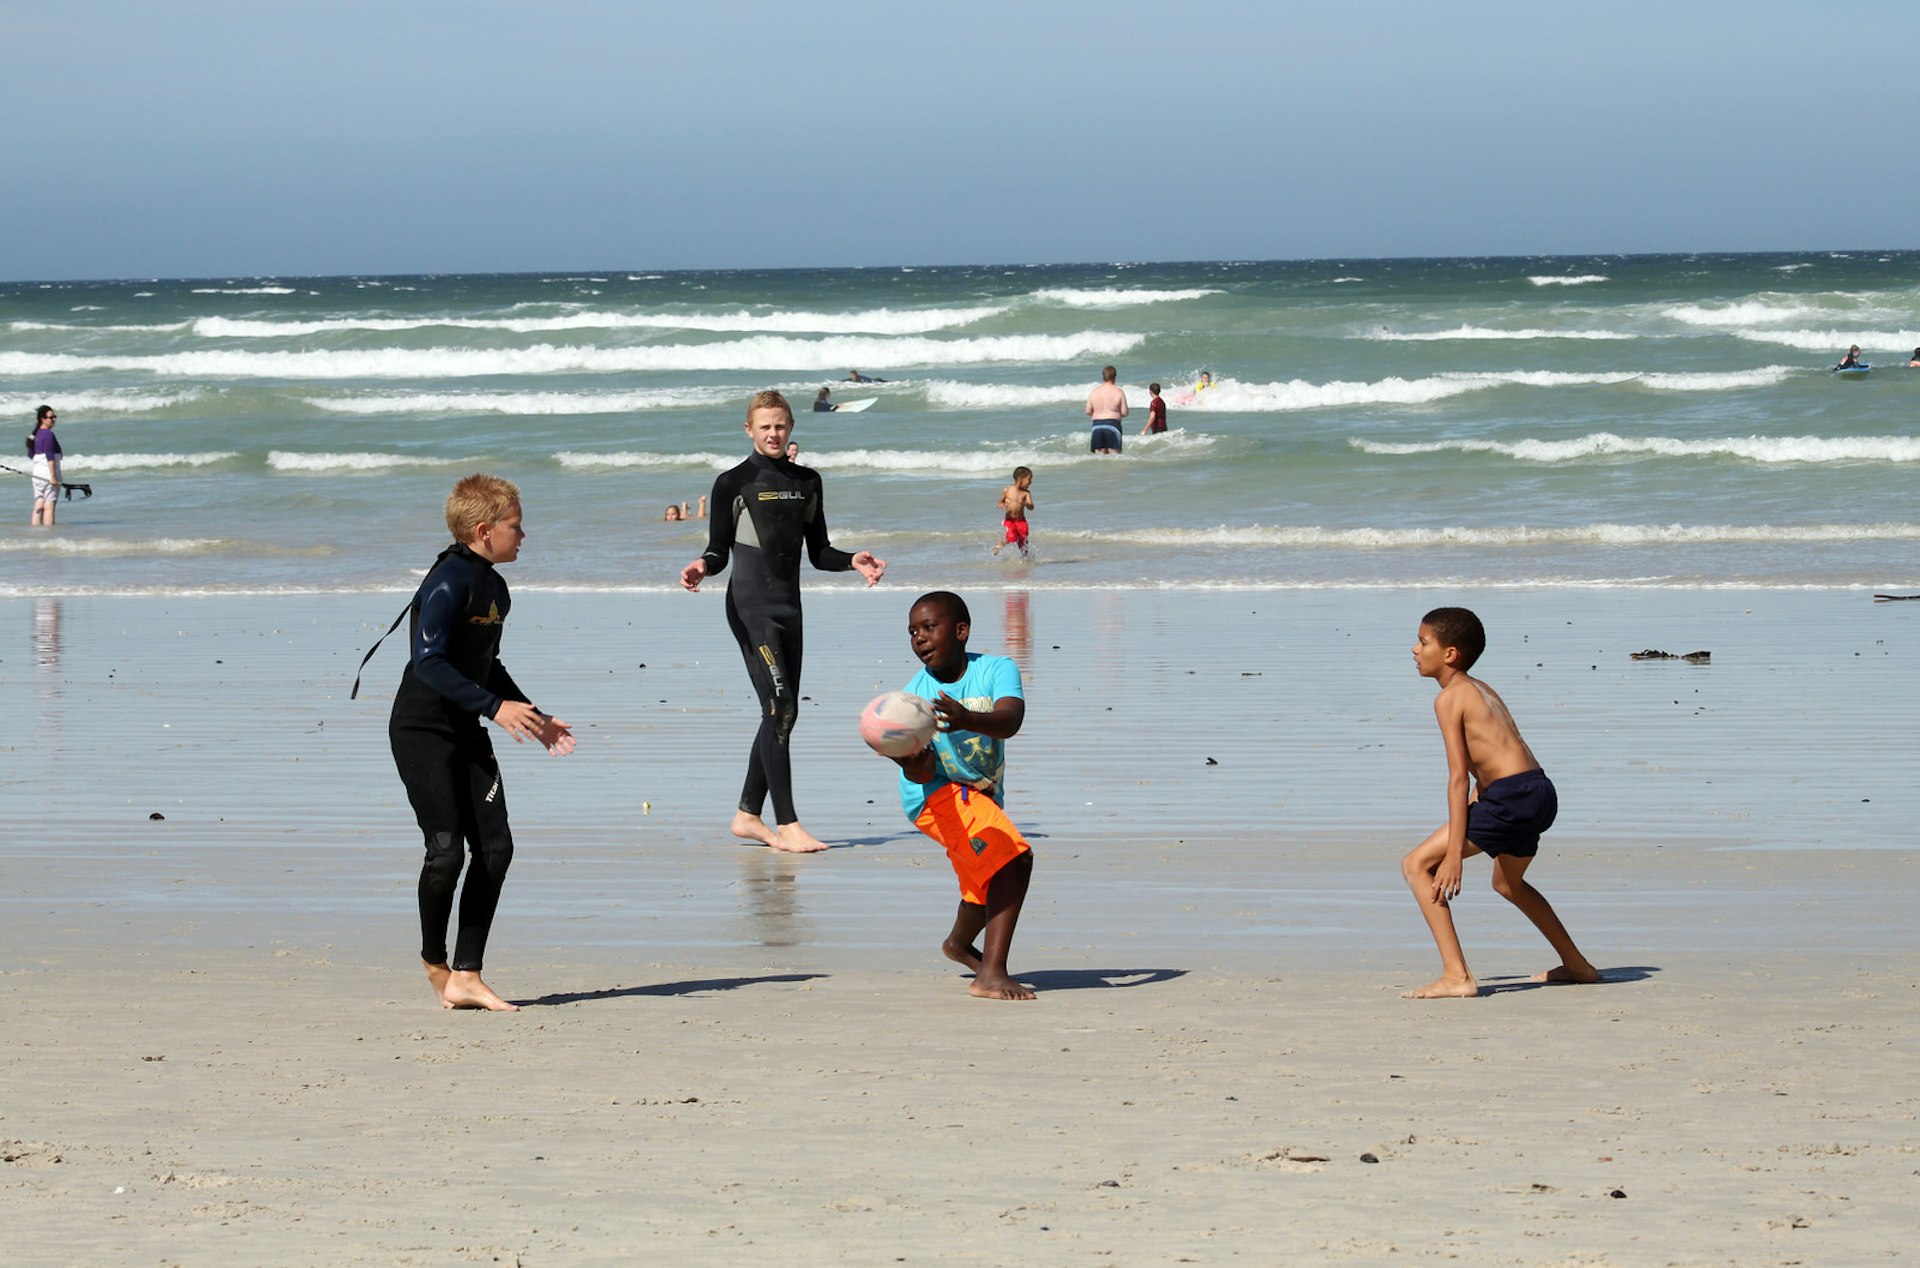 For surfing or a bit of touch rugby, the beach at Muizenberg is great for all ages © flowcomm / CC BY 2.0